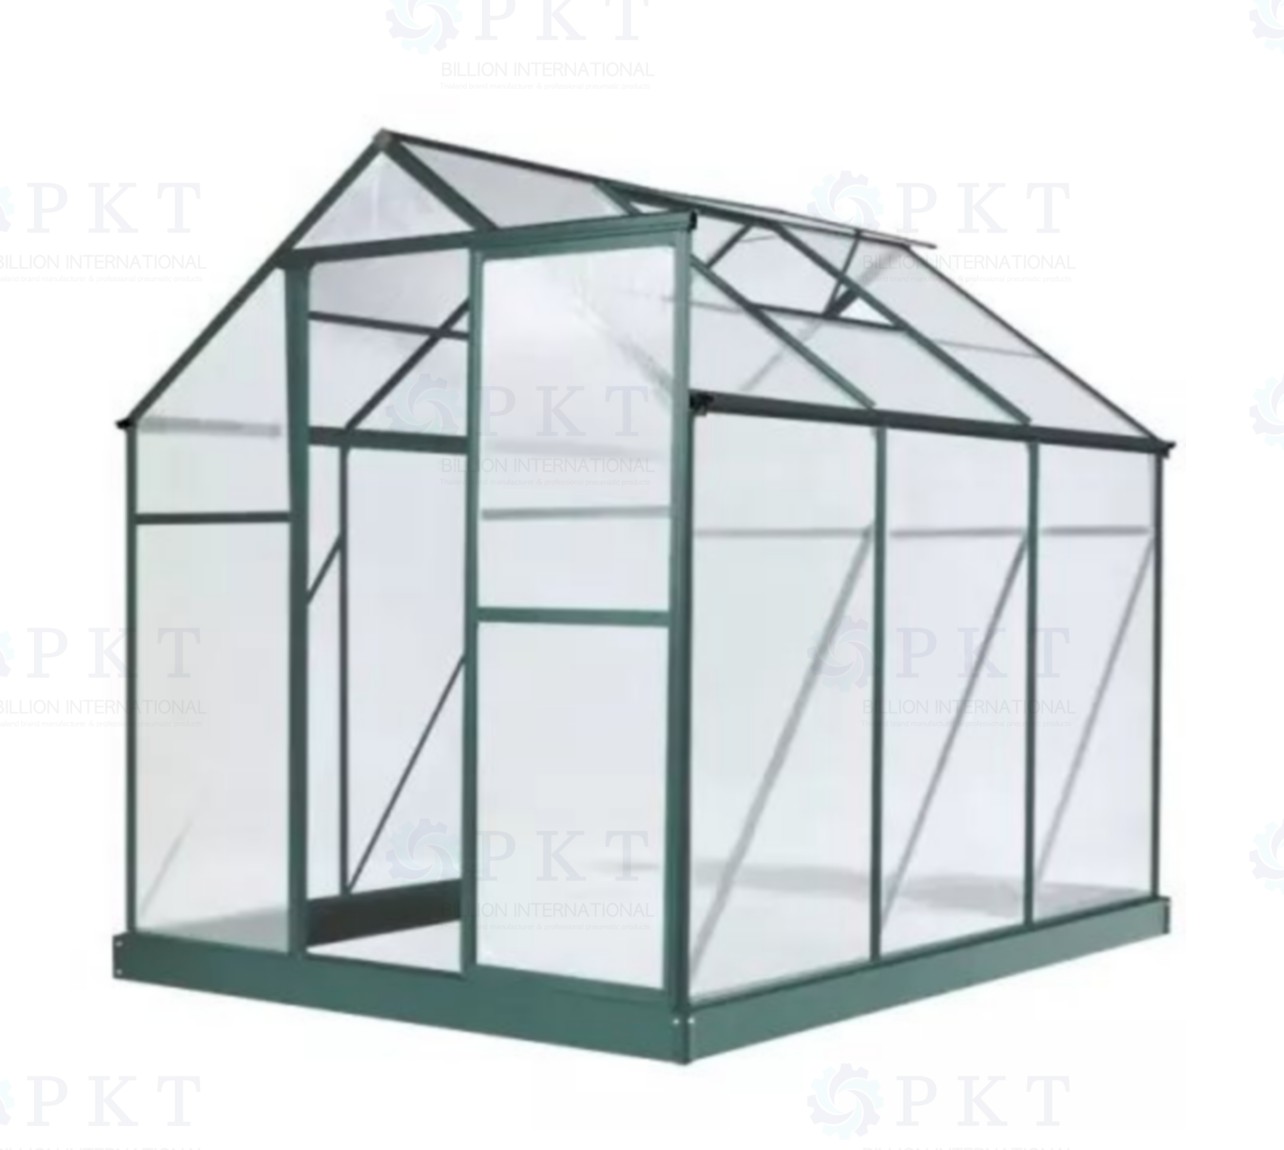 Greenhouse size 2x2 approx.